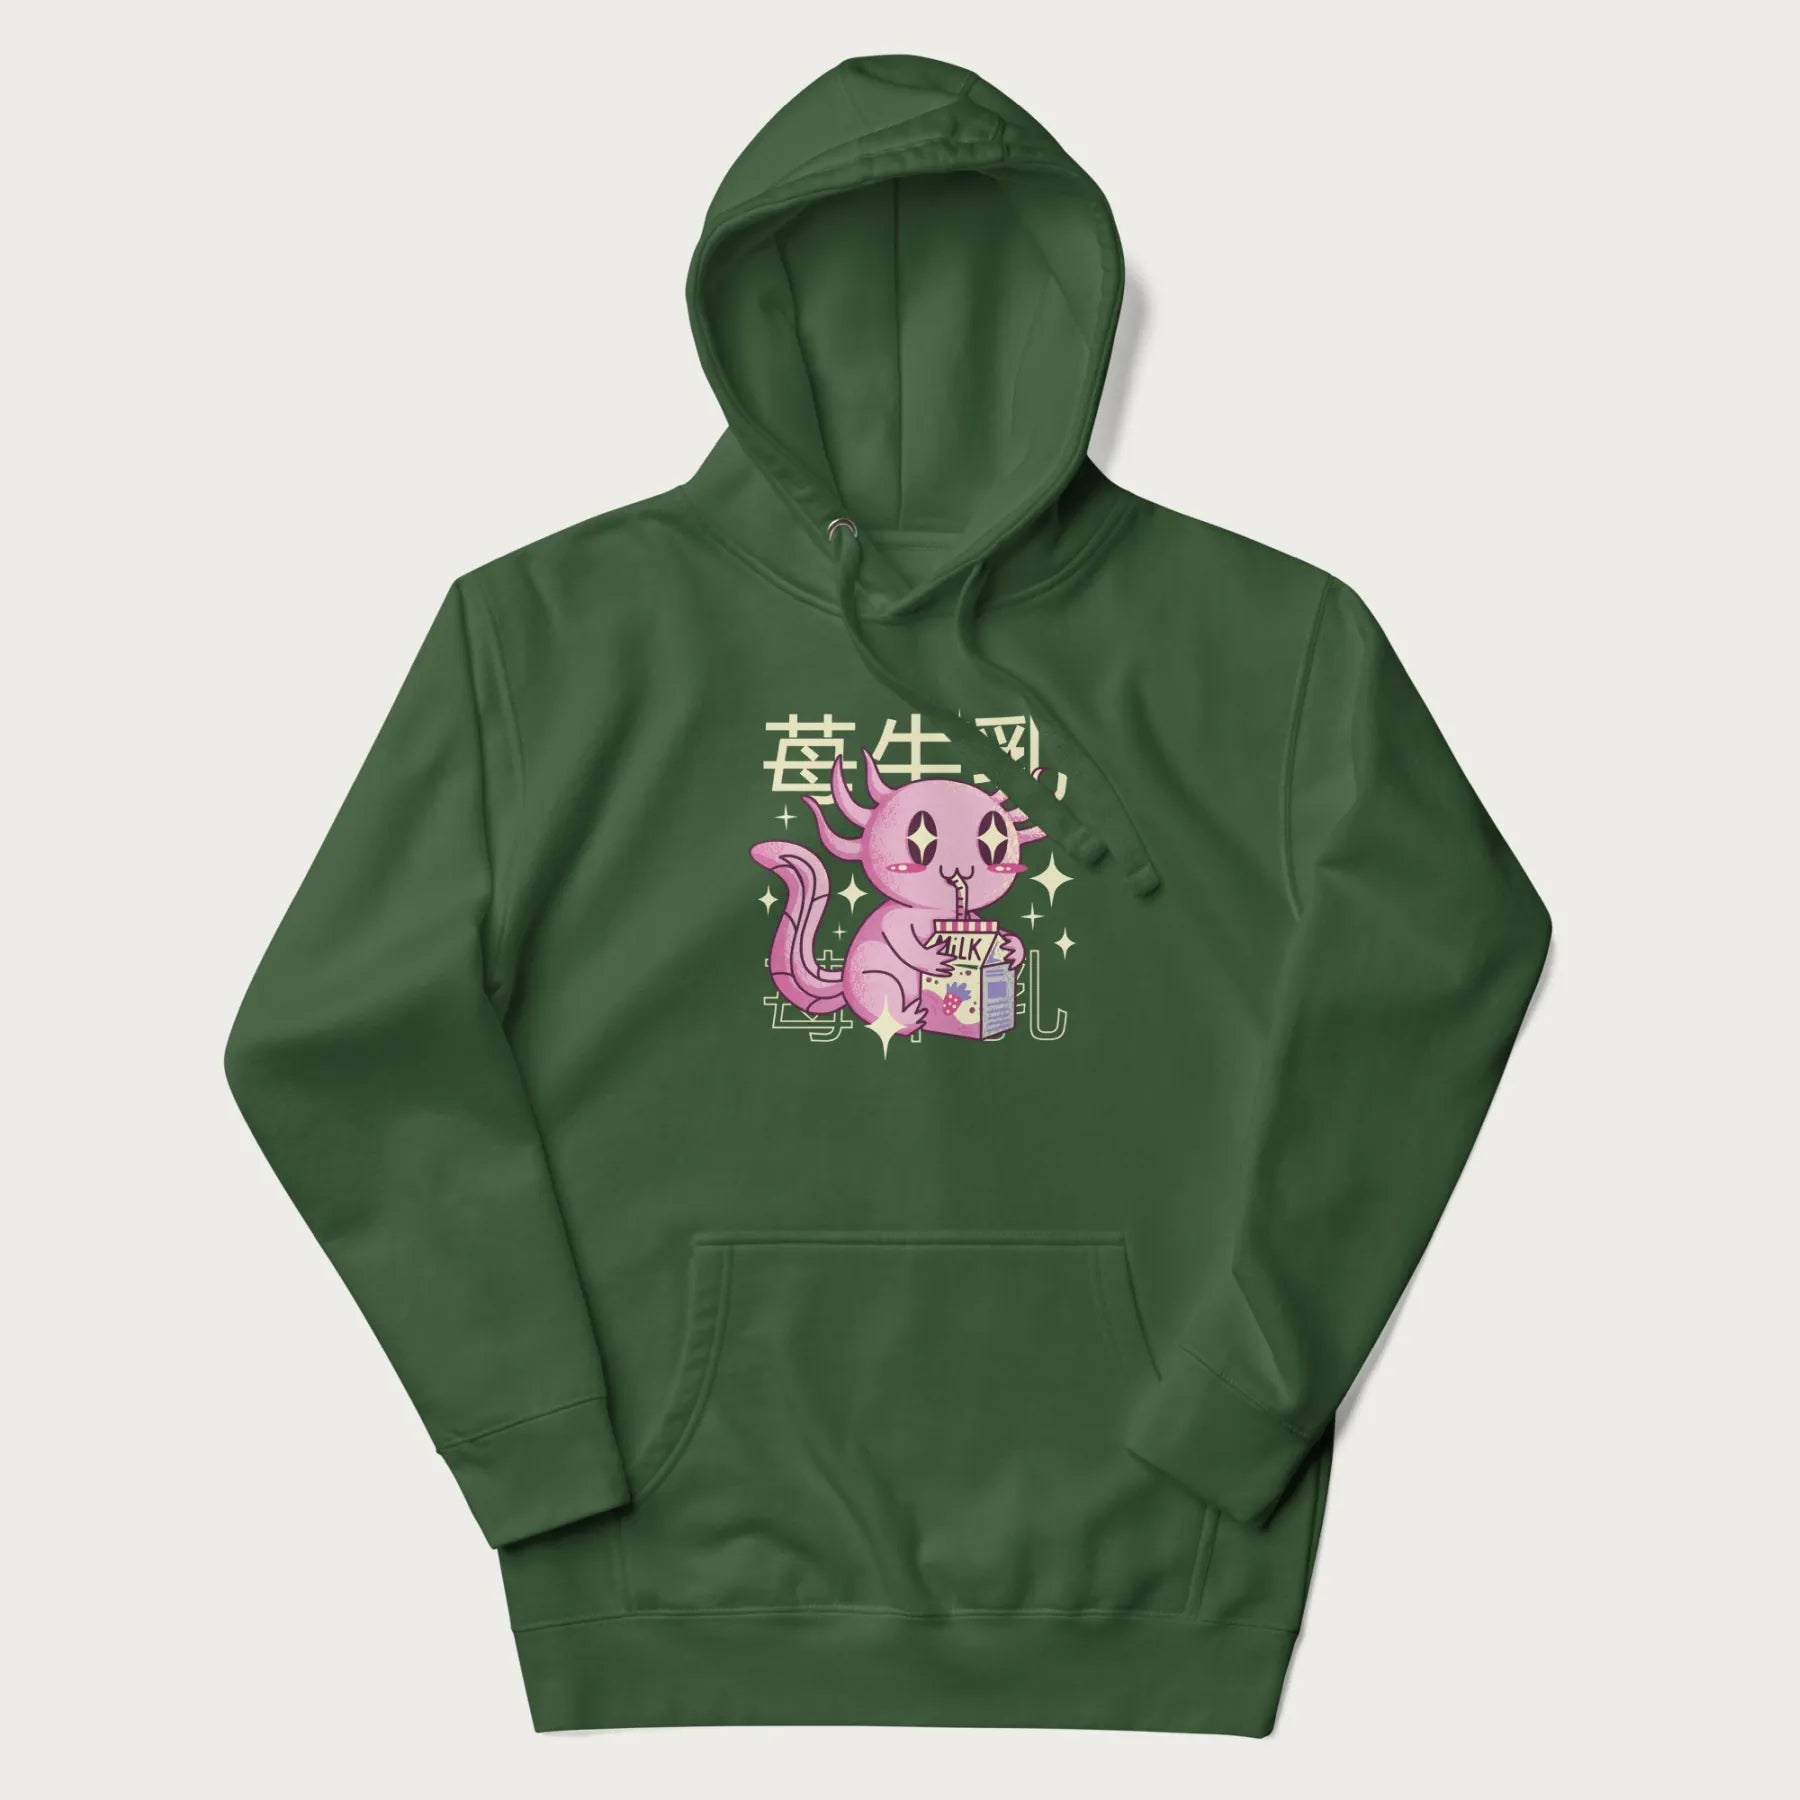 Forest green hoodie with Japanese graphic of a cute pink axolotl sipping strawberry milk from a carton, with Japanese text '苺牛乳' (Strawberry Milk).